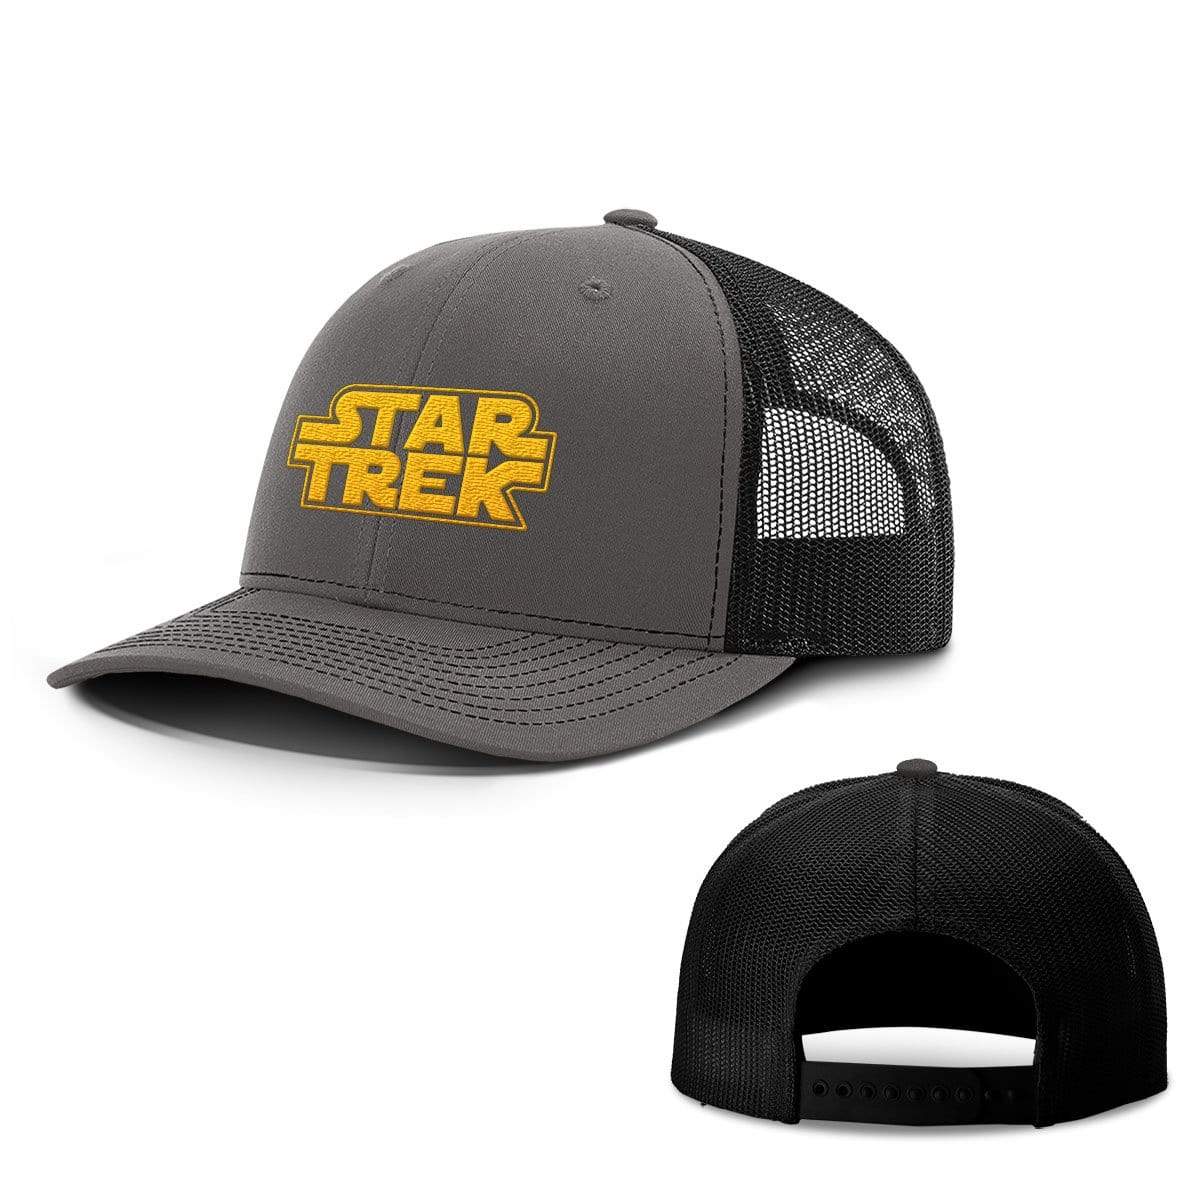 SunFrog-Busted Hats Snapback / Charcoal and Black / One Size Trek Wars Hats